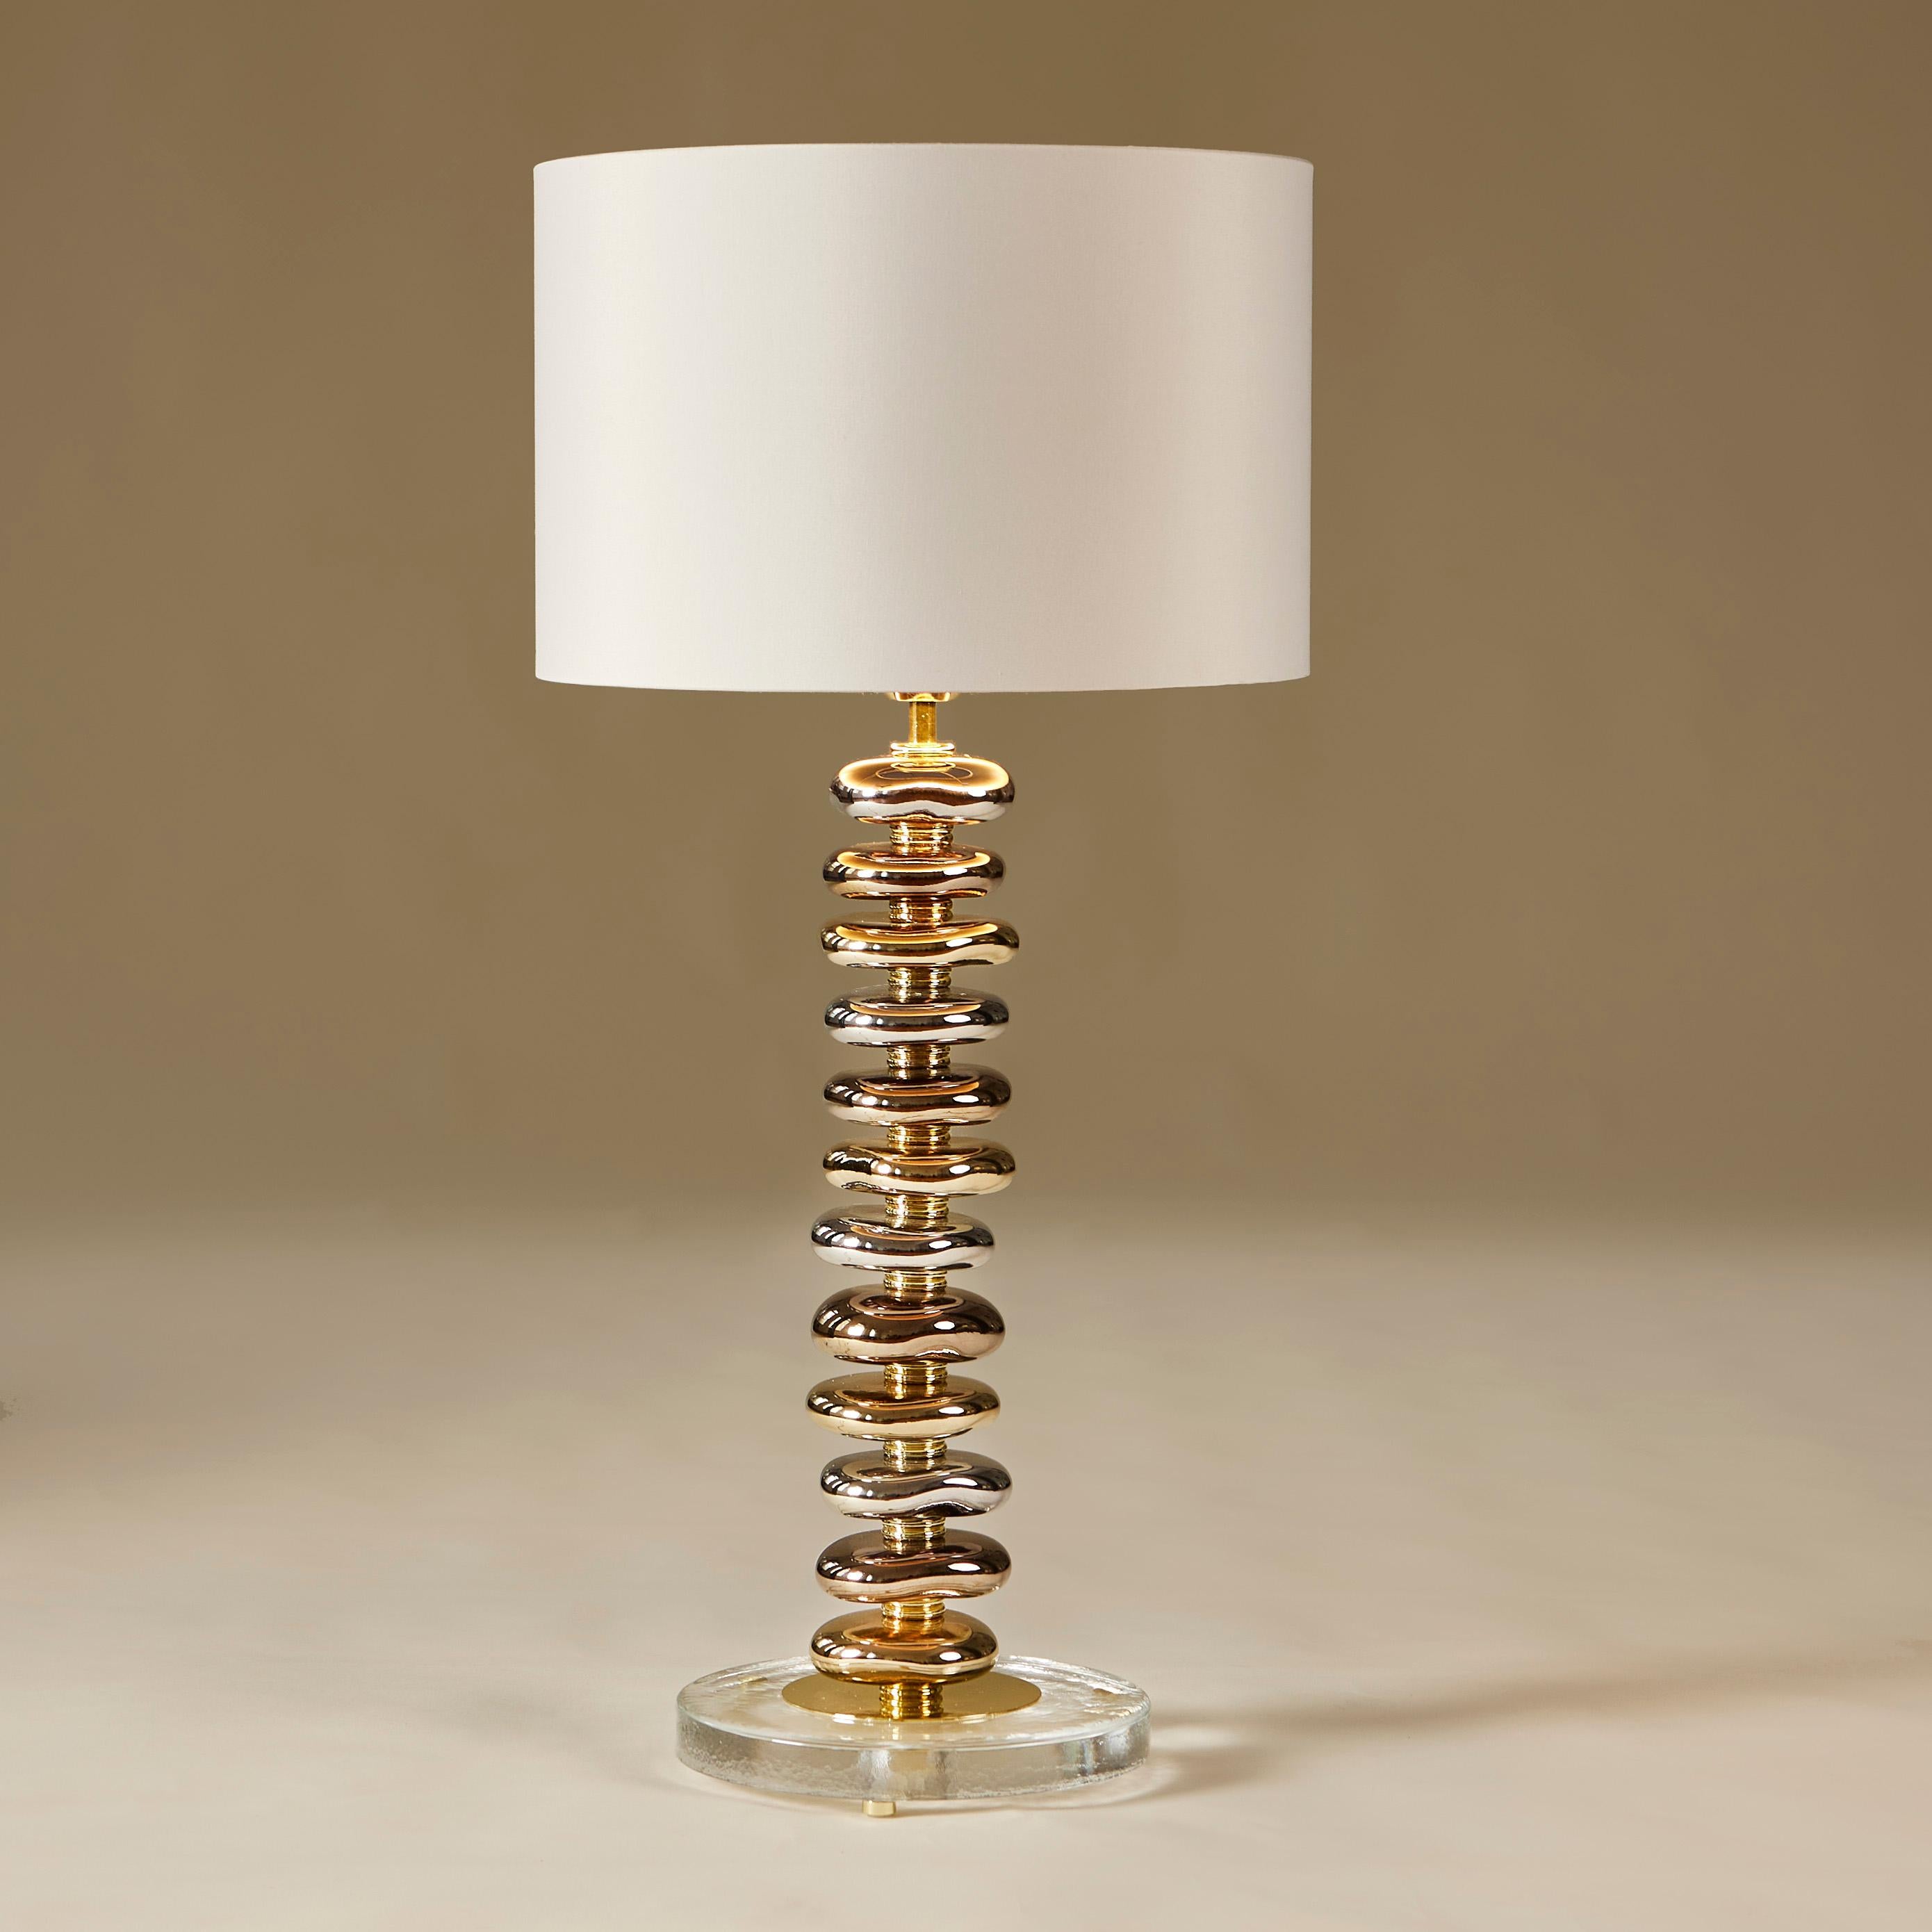 Italian Pair of Tall Murano Glass Metallic and Brass ‘Pebble’ Table Lamps